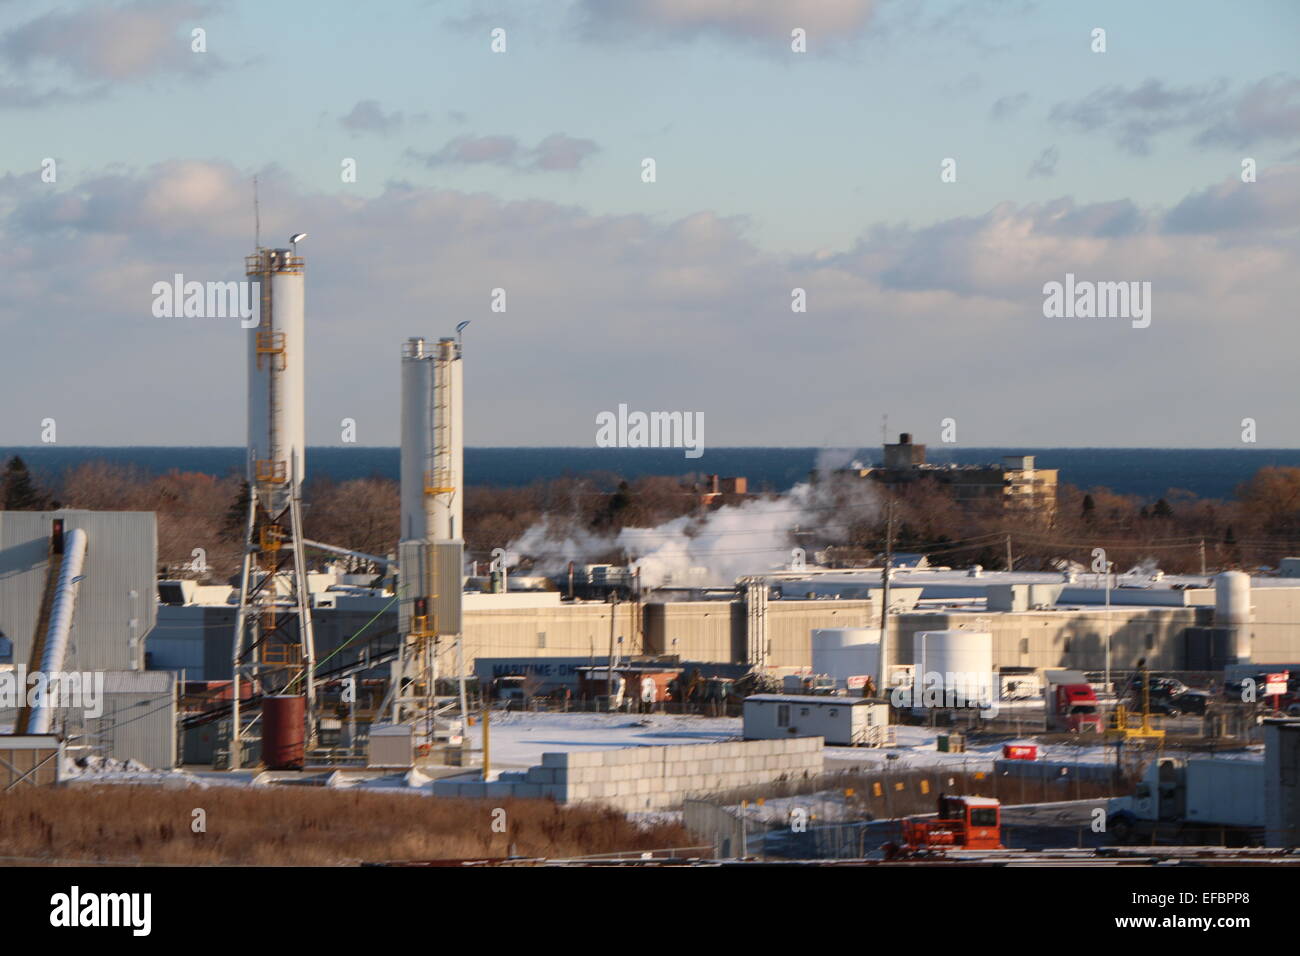 https://c8.alamy.com/comp/EFBPP8/a-large-scale-industry-photo-with-lake-in-the-backgroundfactory-photosky-EFBPP8.jpg